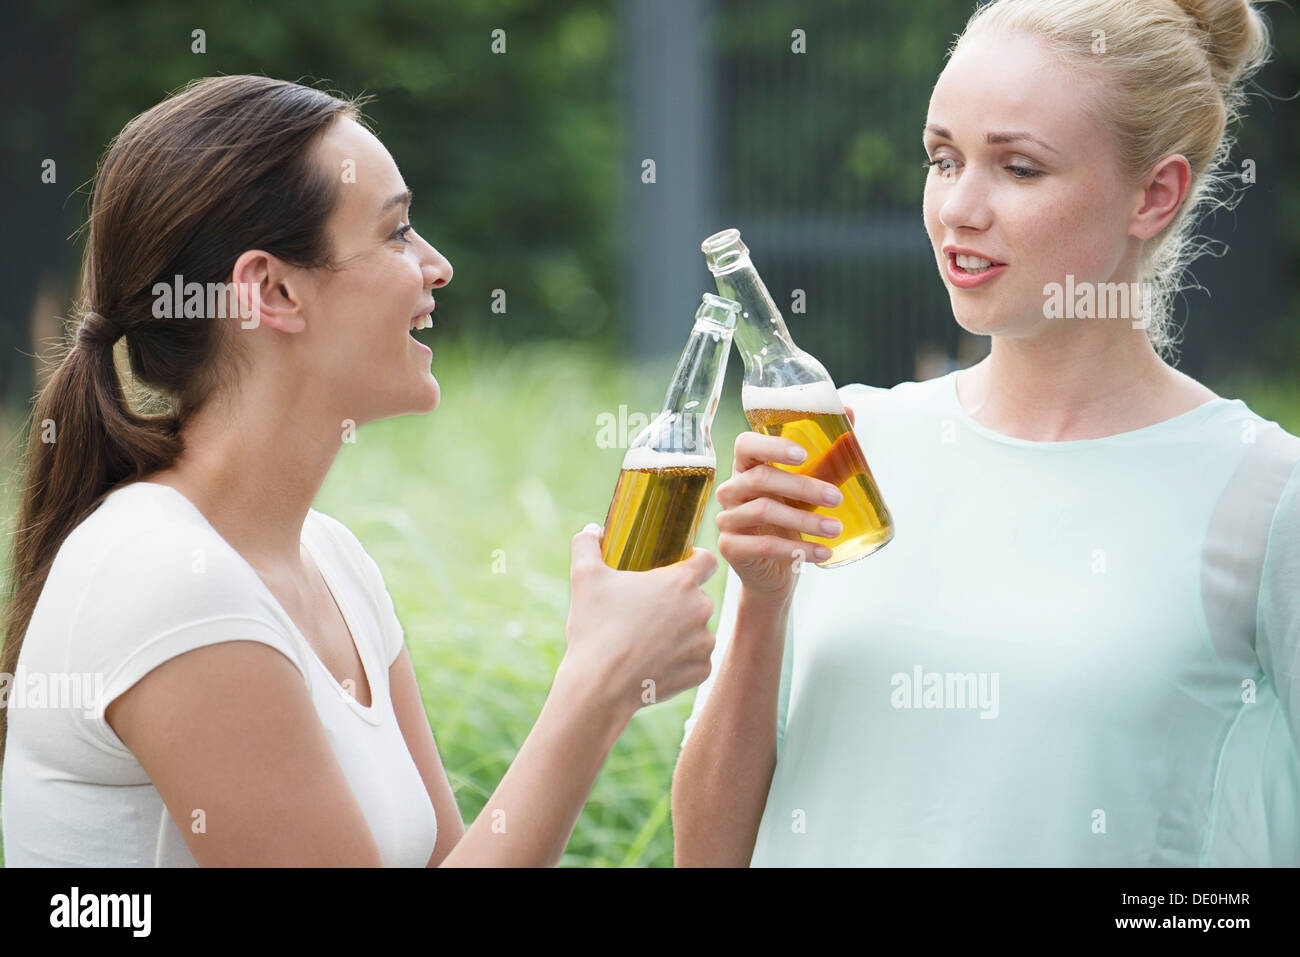 Women drinking together, clinking bottles Stock Photo